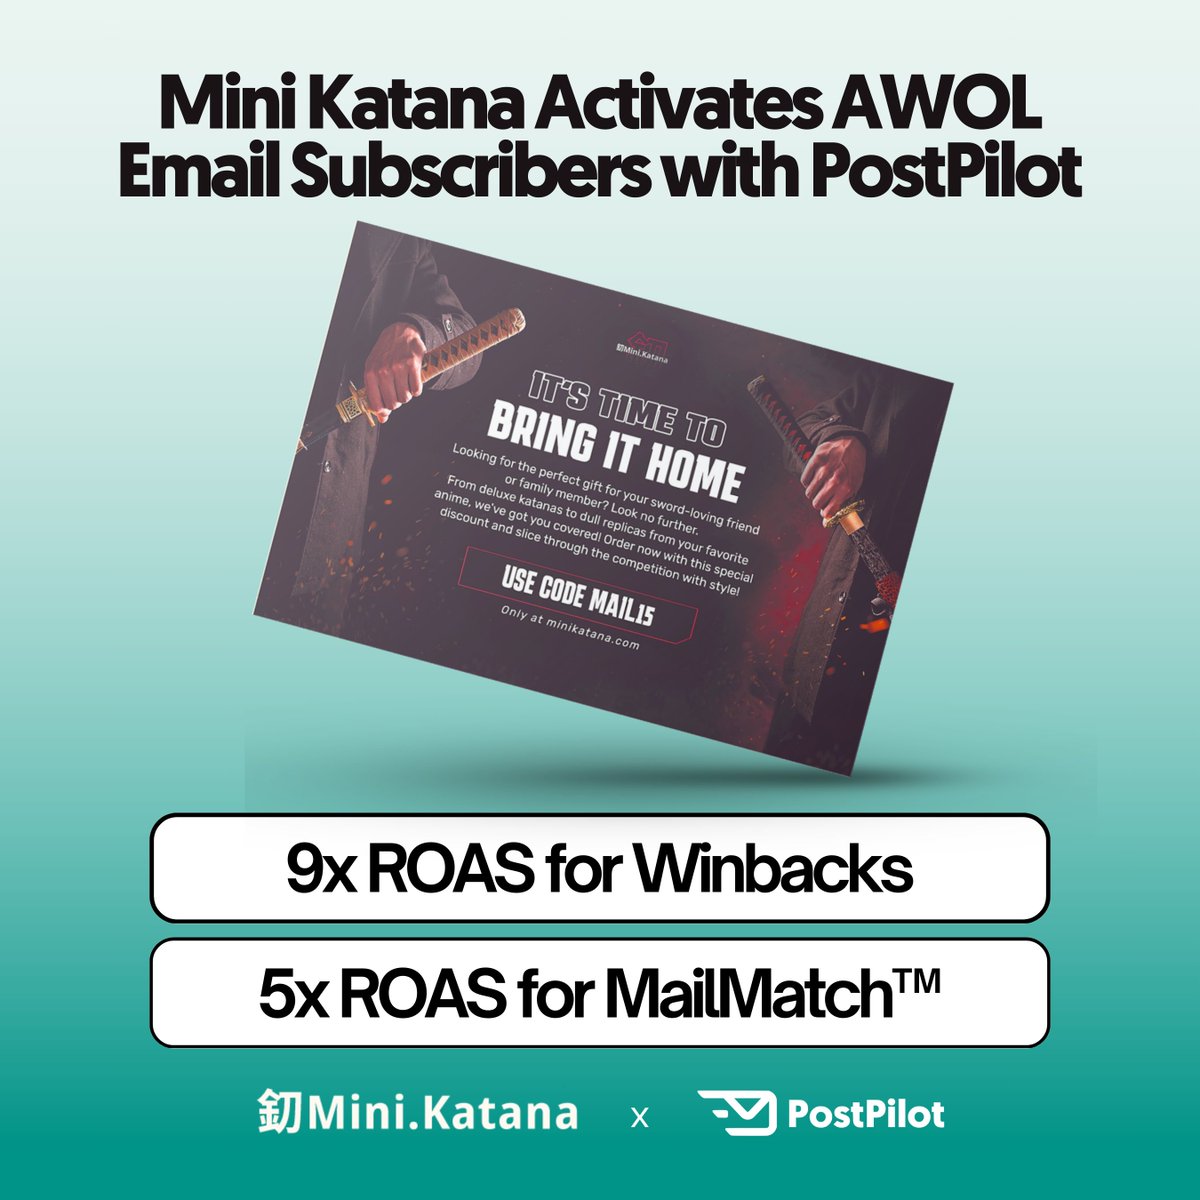 @minikatanastore is getting a 5x ROAS by retargeting warm leads with mail. 

No purchases yet? No problem.

The team's using MailMatch to send beautiful postcards to people who've signed up for email but haven't converted.

And it was a no-sweat, low-lift launch:

'PostPilot did…